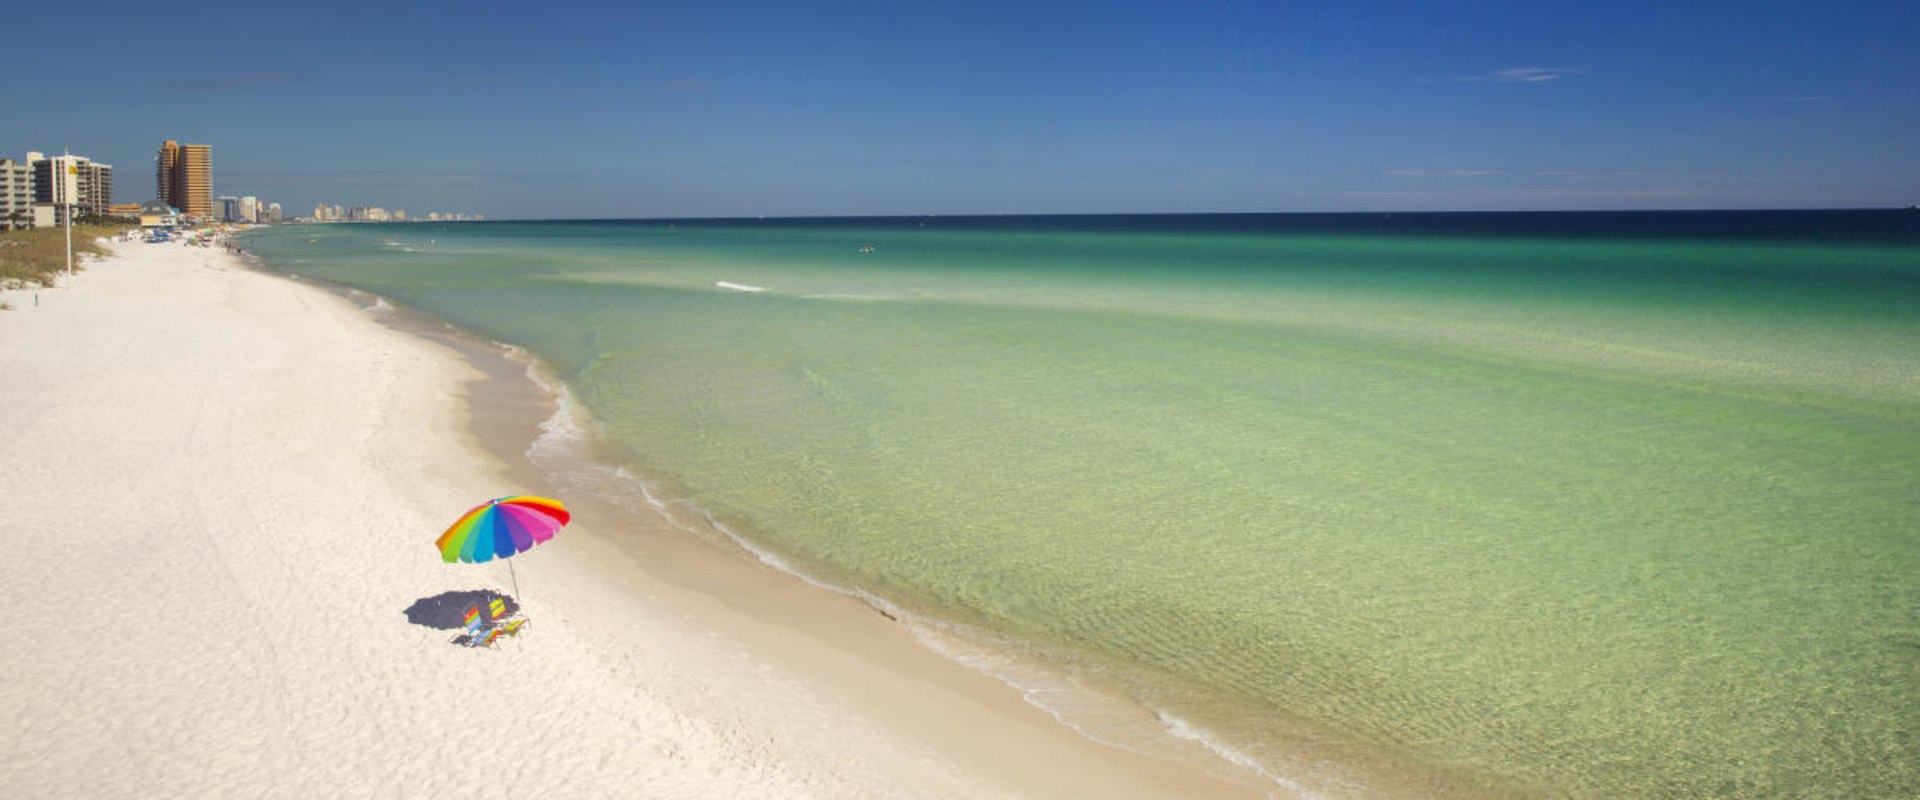 Explore the Best Swimming Spots in Panama City, Florida